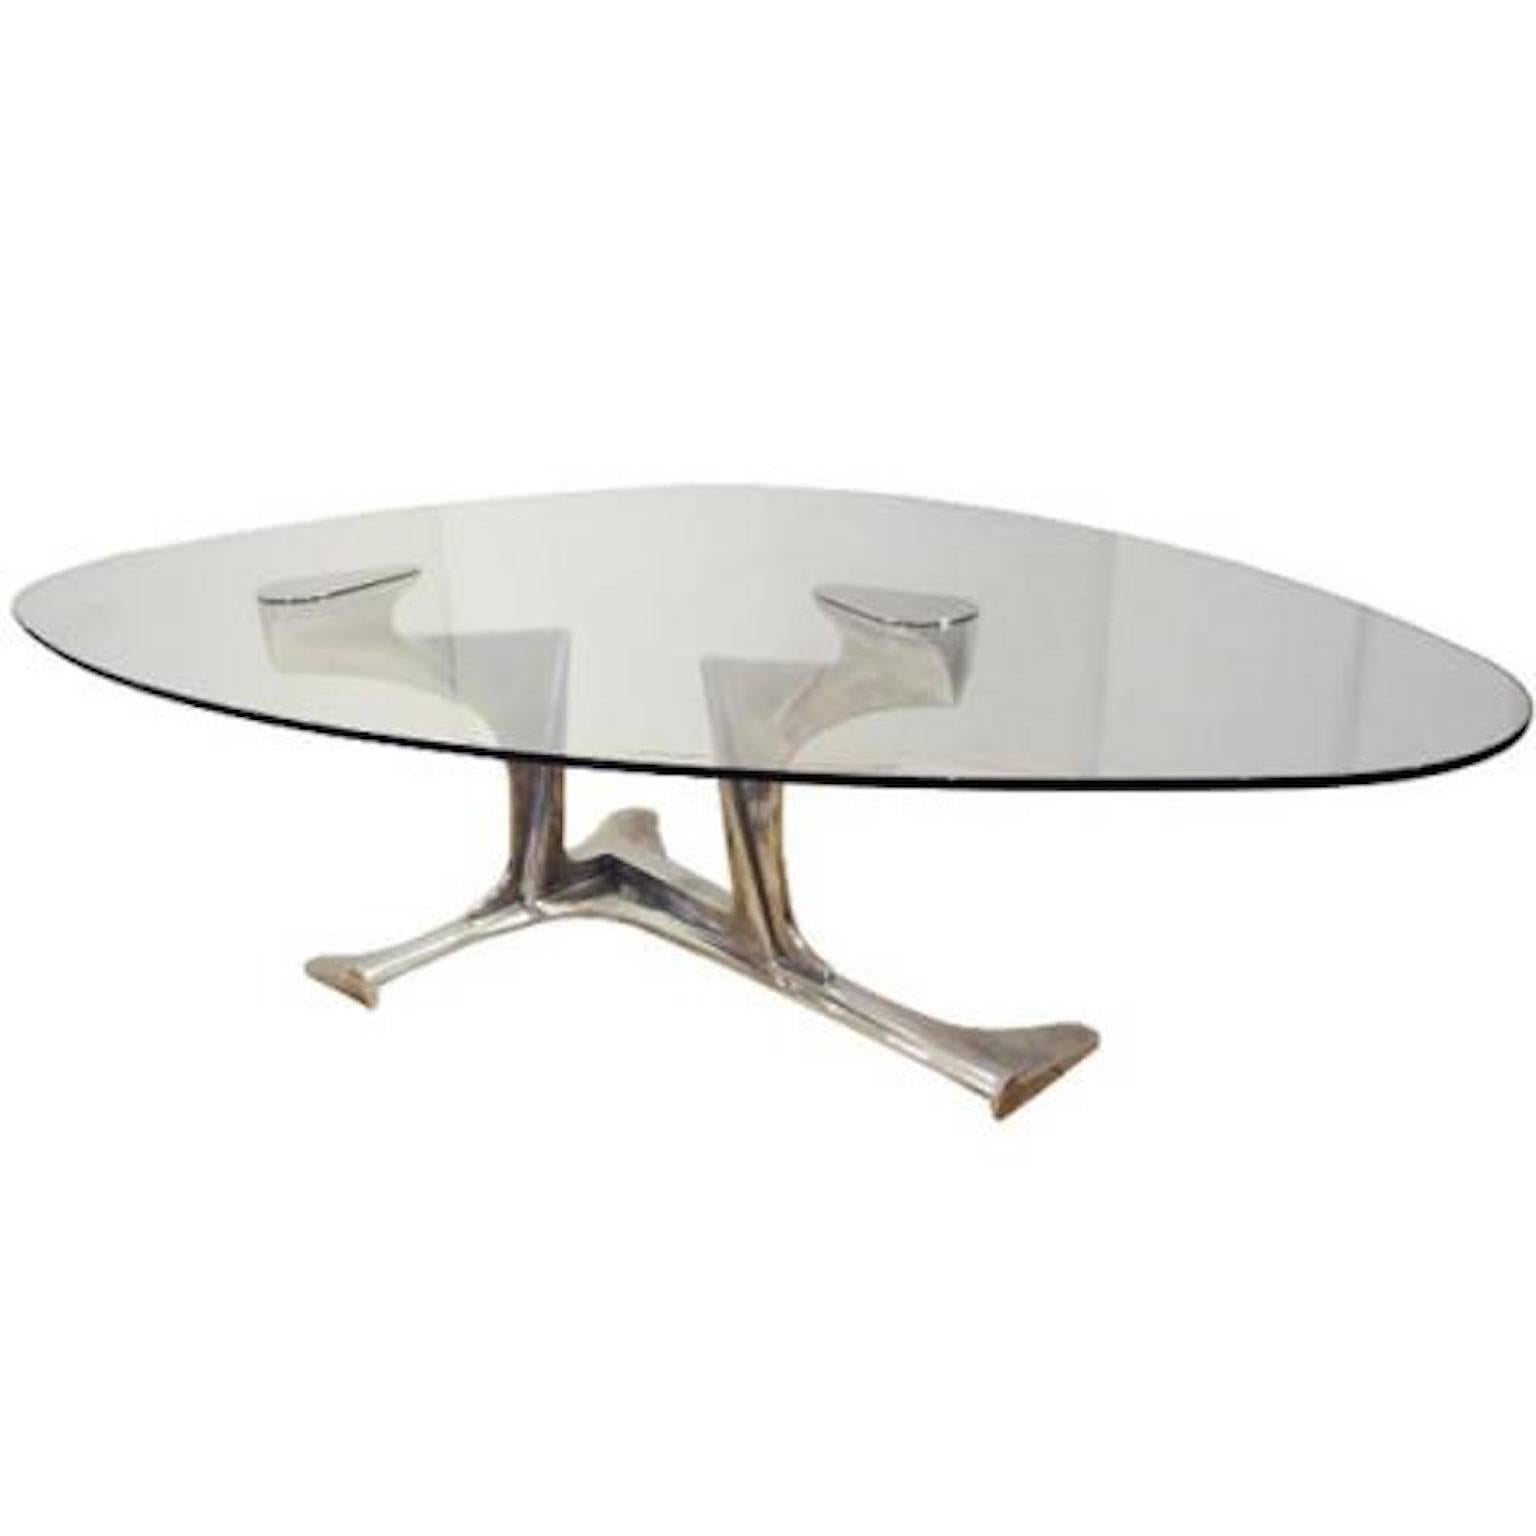 Gerard Mannoni, an Exceptional Signed and Numbered Dining Table For Sale